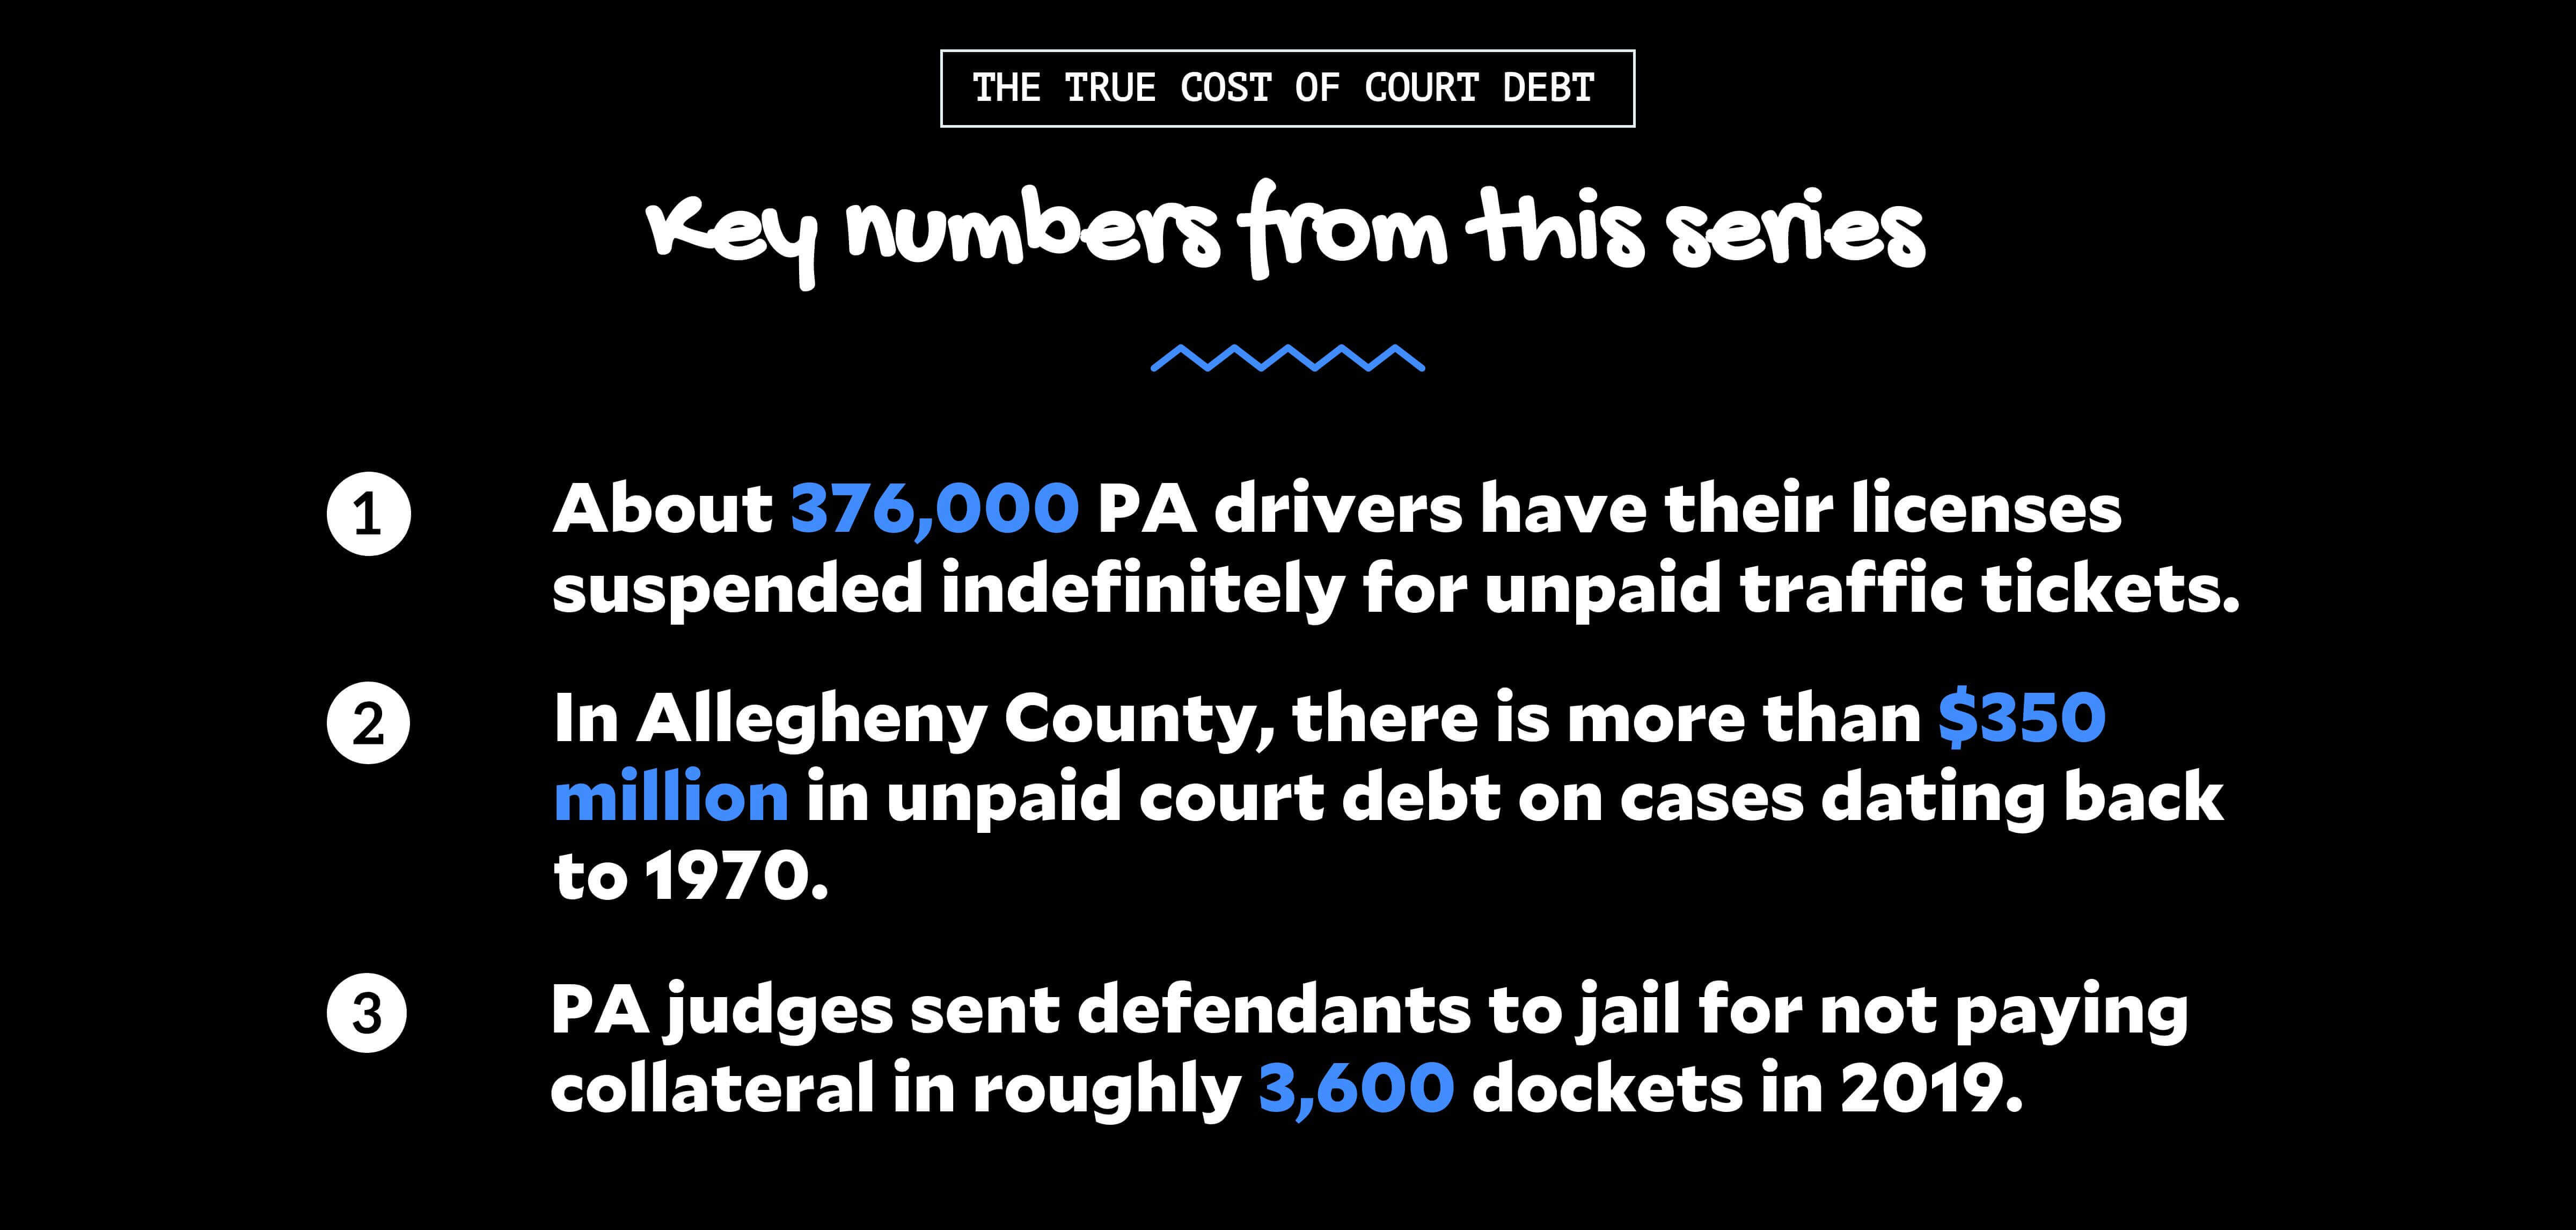 The True Cost of Court Debt: How not paying court fines and costs can